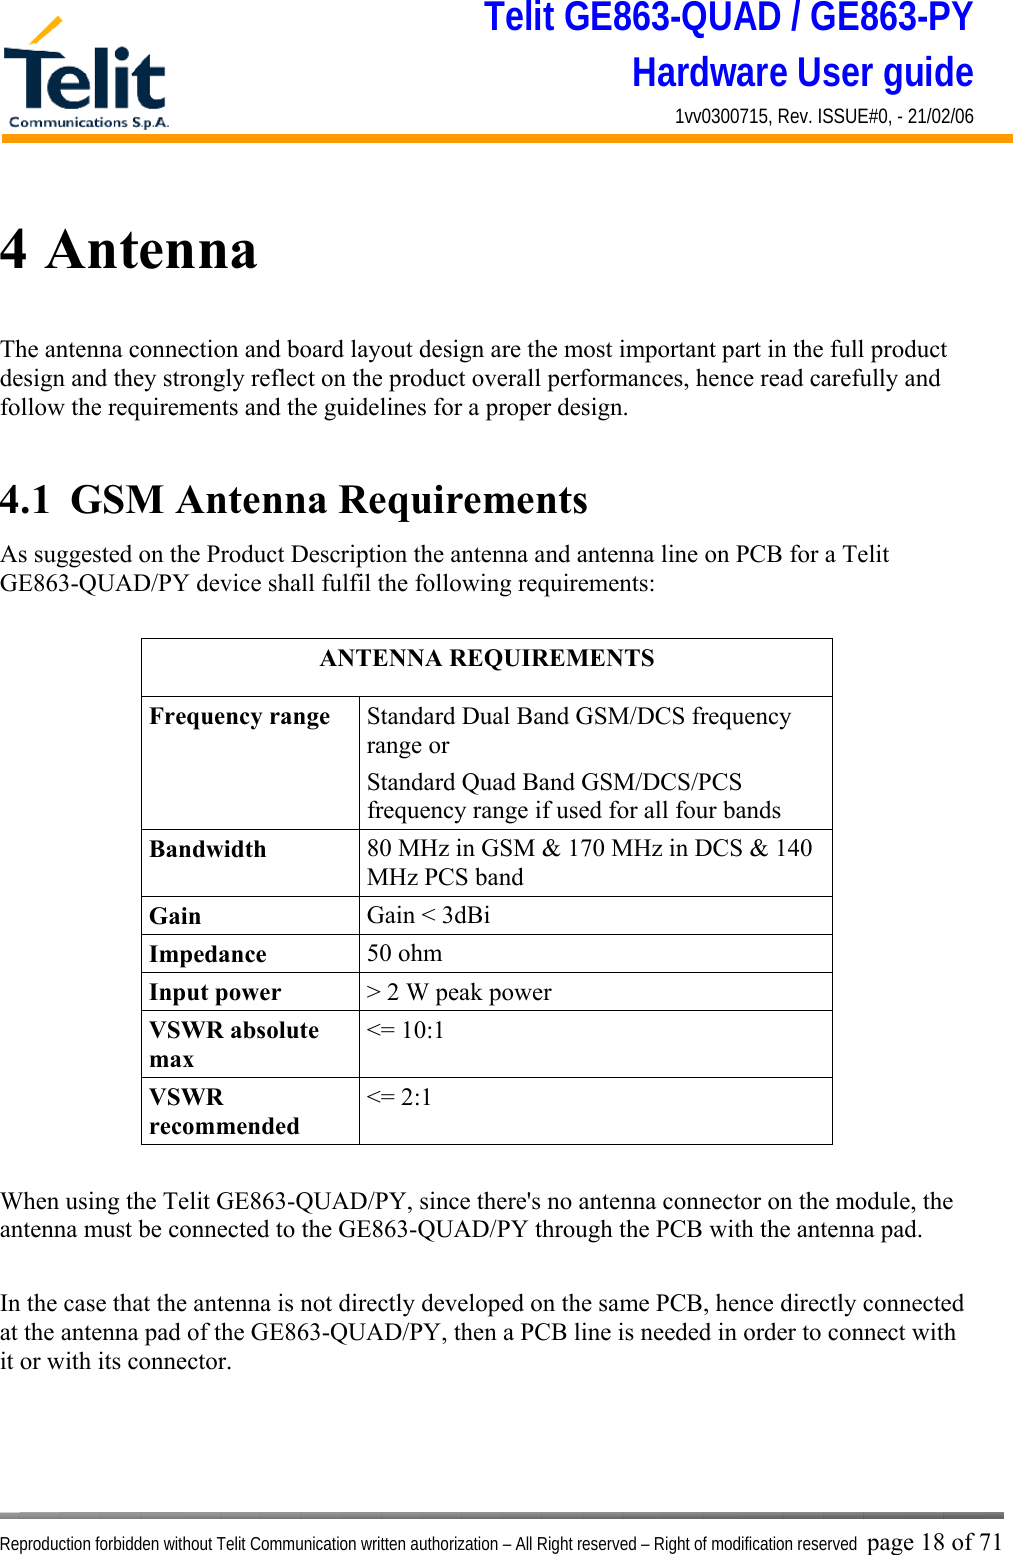 Telit GE863-QUAD / GE863-PY Hardware User guide 1vv0300715, Rev. ISSUE#0, - 21/02/06    Reproduction forbidden without Telit Communication written authorization – All Right reserved – Right of modification reserved page 18 of 71 4 Antenna The antenna connection and board layout design are the most important part in the full product design and they strongly reflect on the product overall performances, hence read carefully and follow the requirements and the guidelines for a proper design.  4.1  GSM Antenna Requirements As suggested on the Product Description the antenna and antenna line on PCB for a Telit GE863-QUAD/PY device shall fulfil the following requirements:  ANTENNA REQUIREMENTS Frequency range  Standard Dual Band GSM/DCS frequency range or  Standard Quad Band GSM/DCS/PCS frequency range if used for all four bands Bandwidth  80 MHz in GSM &amp; 170 MHz in DCS &amp; 140 MHz PCS band Gain  Gain &lt; 3dBi Impedance  50 ohm Input power  &gt; 2 W peak power VSWR absolute max &lt;= 10:1 VSWR recommended &lt;= 2:1  When using the Telit GE863-QUAD/PY, since there&apos;s no antenna connector on the module, the antenna must be connected to the GE863-QUAD/PY through the PCB with the antenna pad.  In the case that the antenna is not directly developed on the same PCB, hence directly connected at the antenna pad of the GE863-QUAD/PY, then a PCB line is needed in order to connect with it or with its connector.     